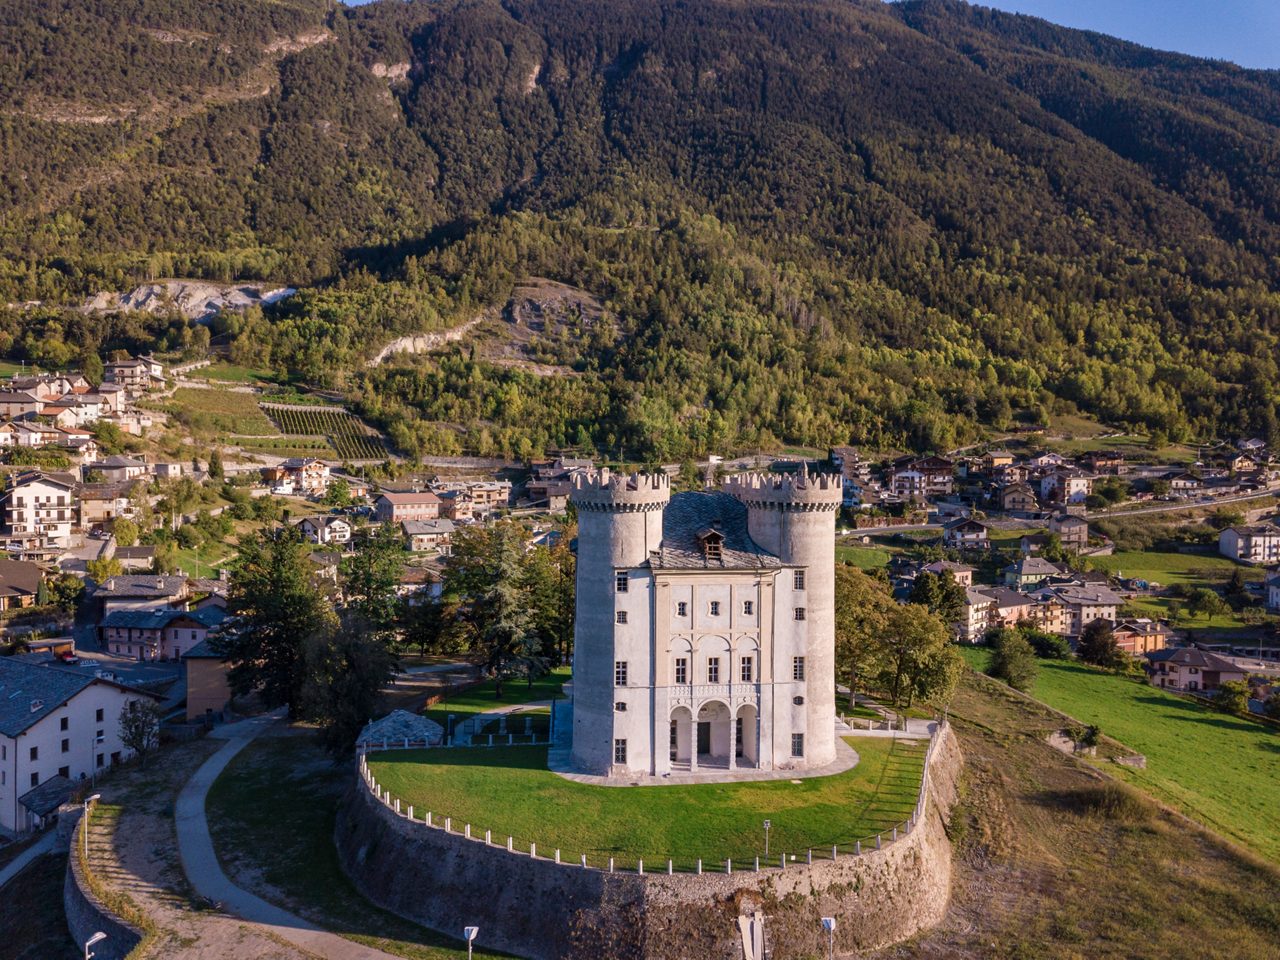 Aerial view of the castle of Aymavilles, Aosta, Italy